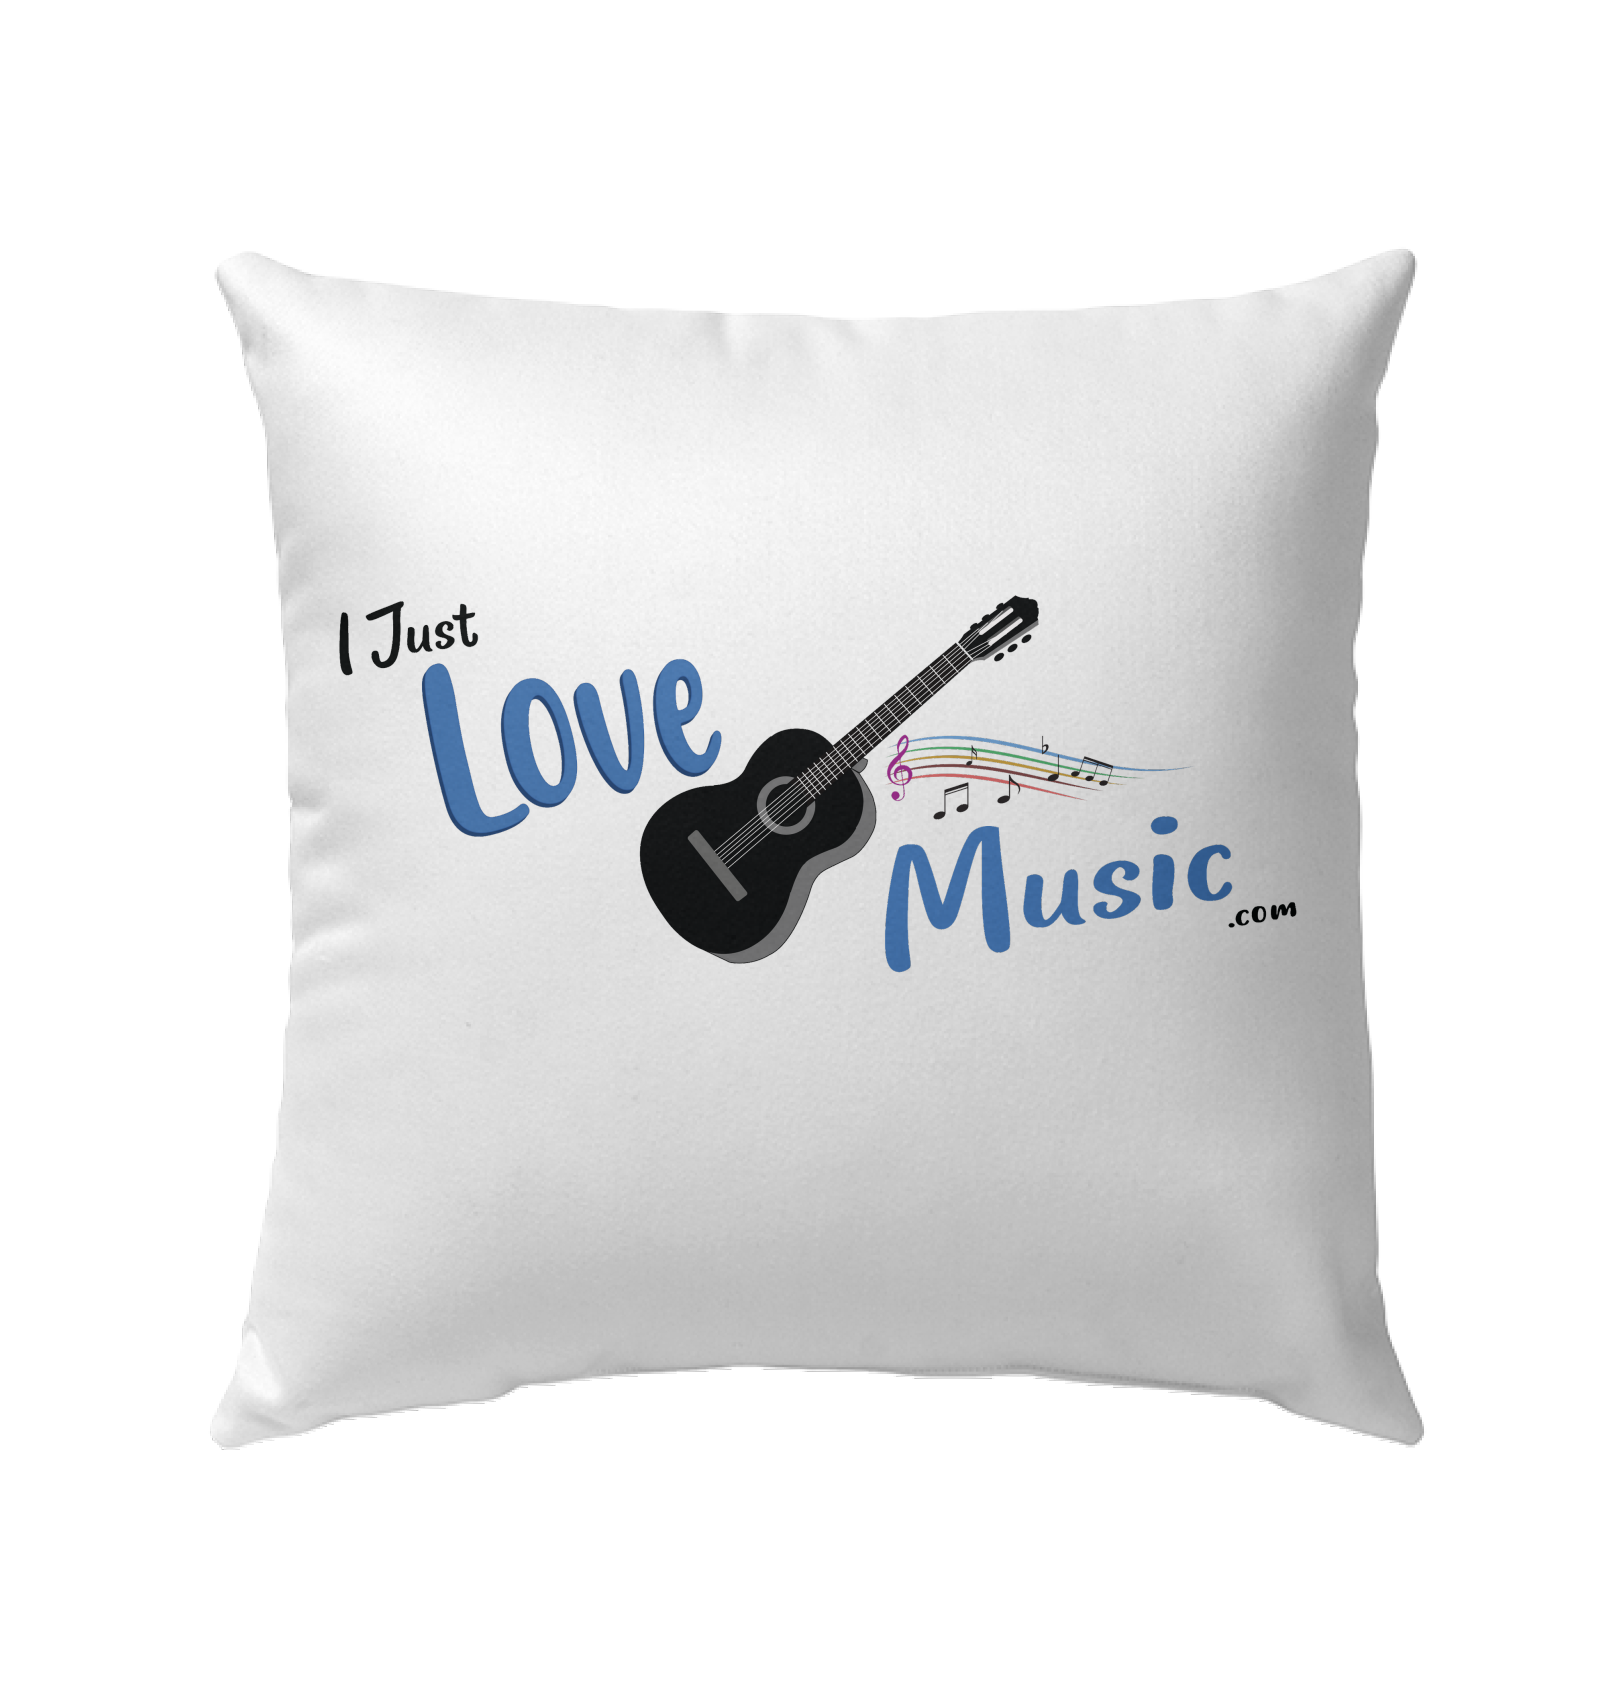 I Just LOVE Music  - Outdoor Pillow